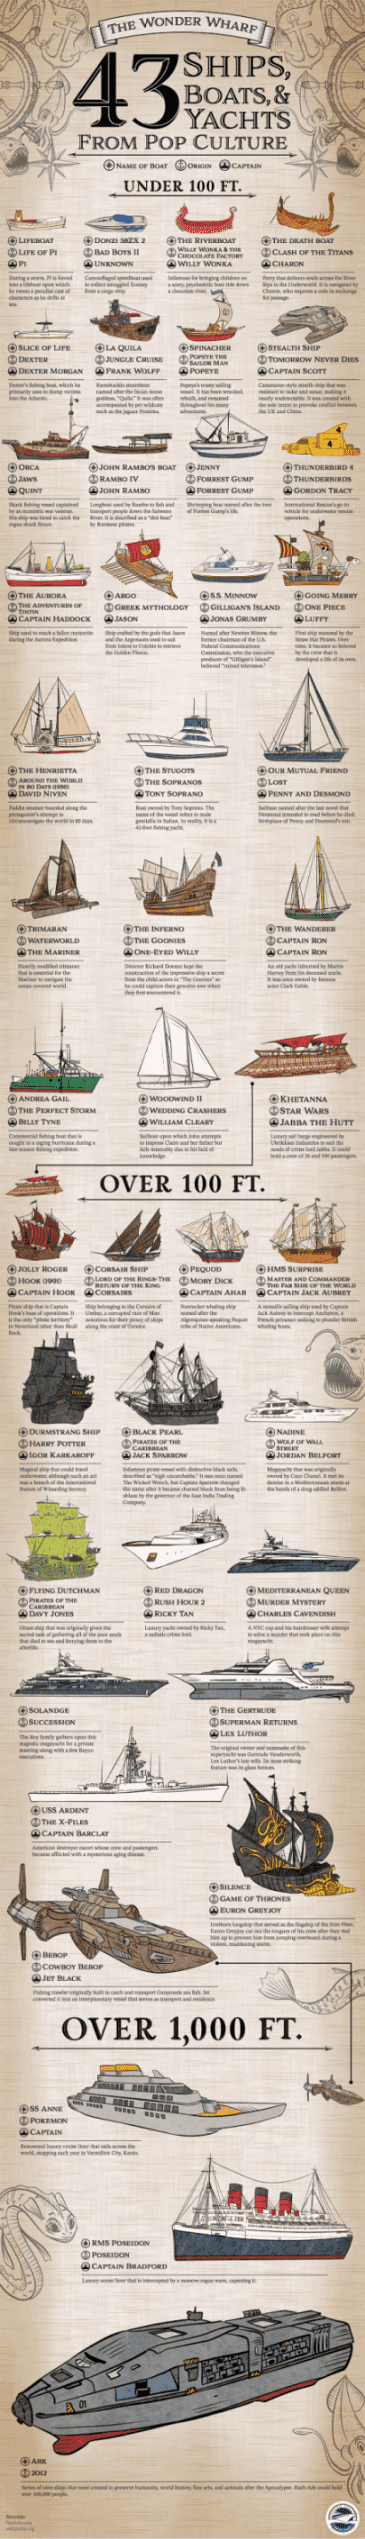 43-ships-boats-yachts-pop-culture-Infographic